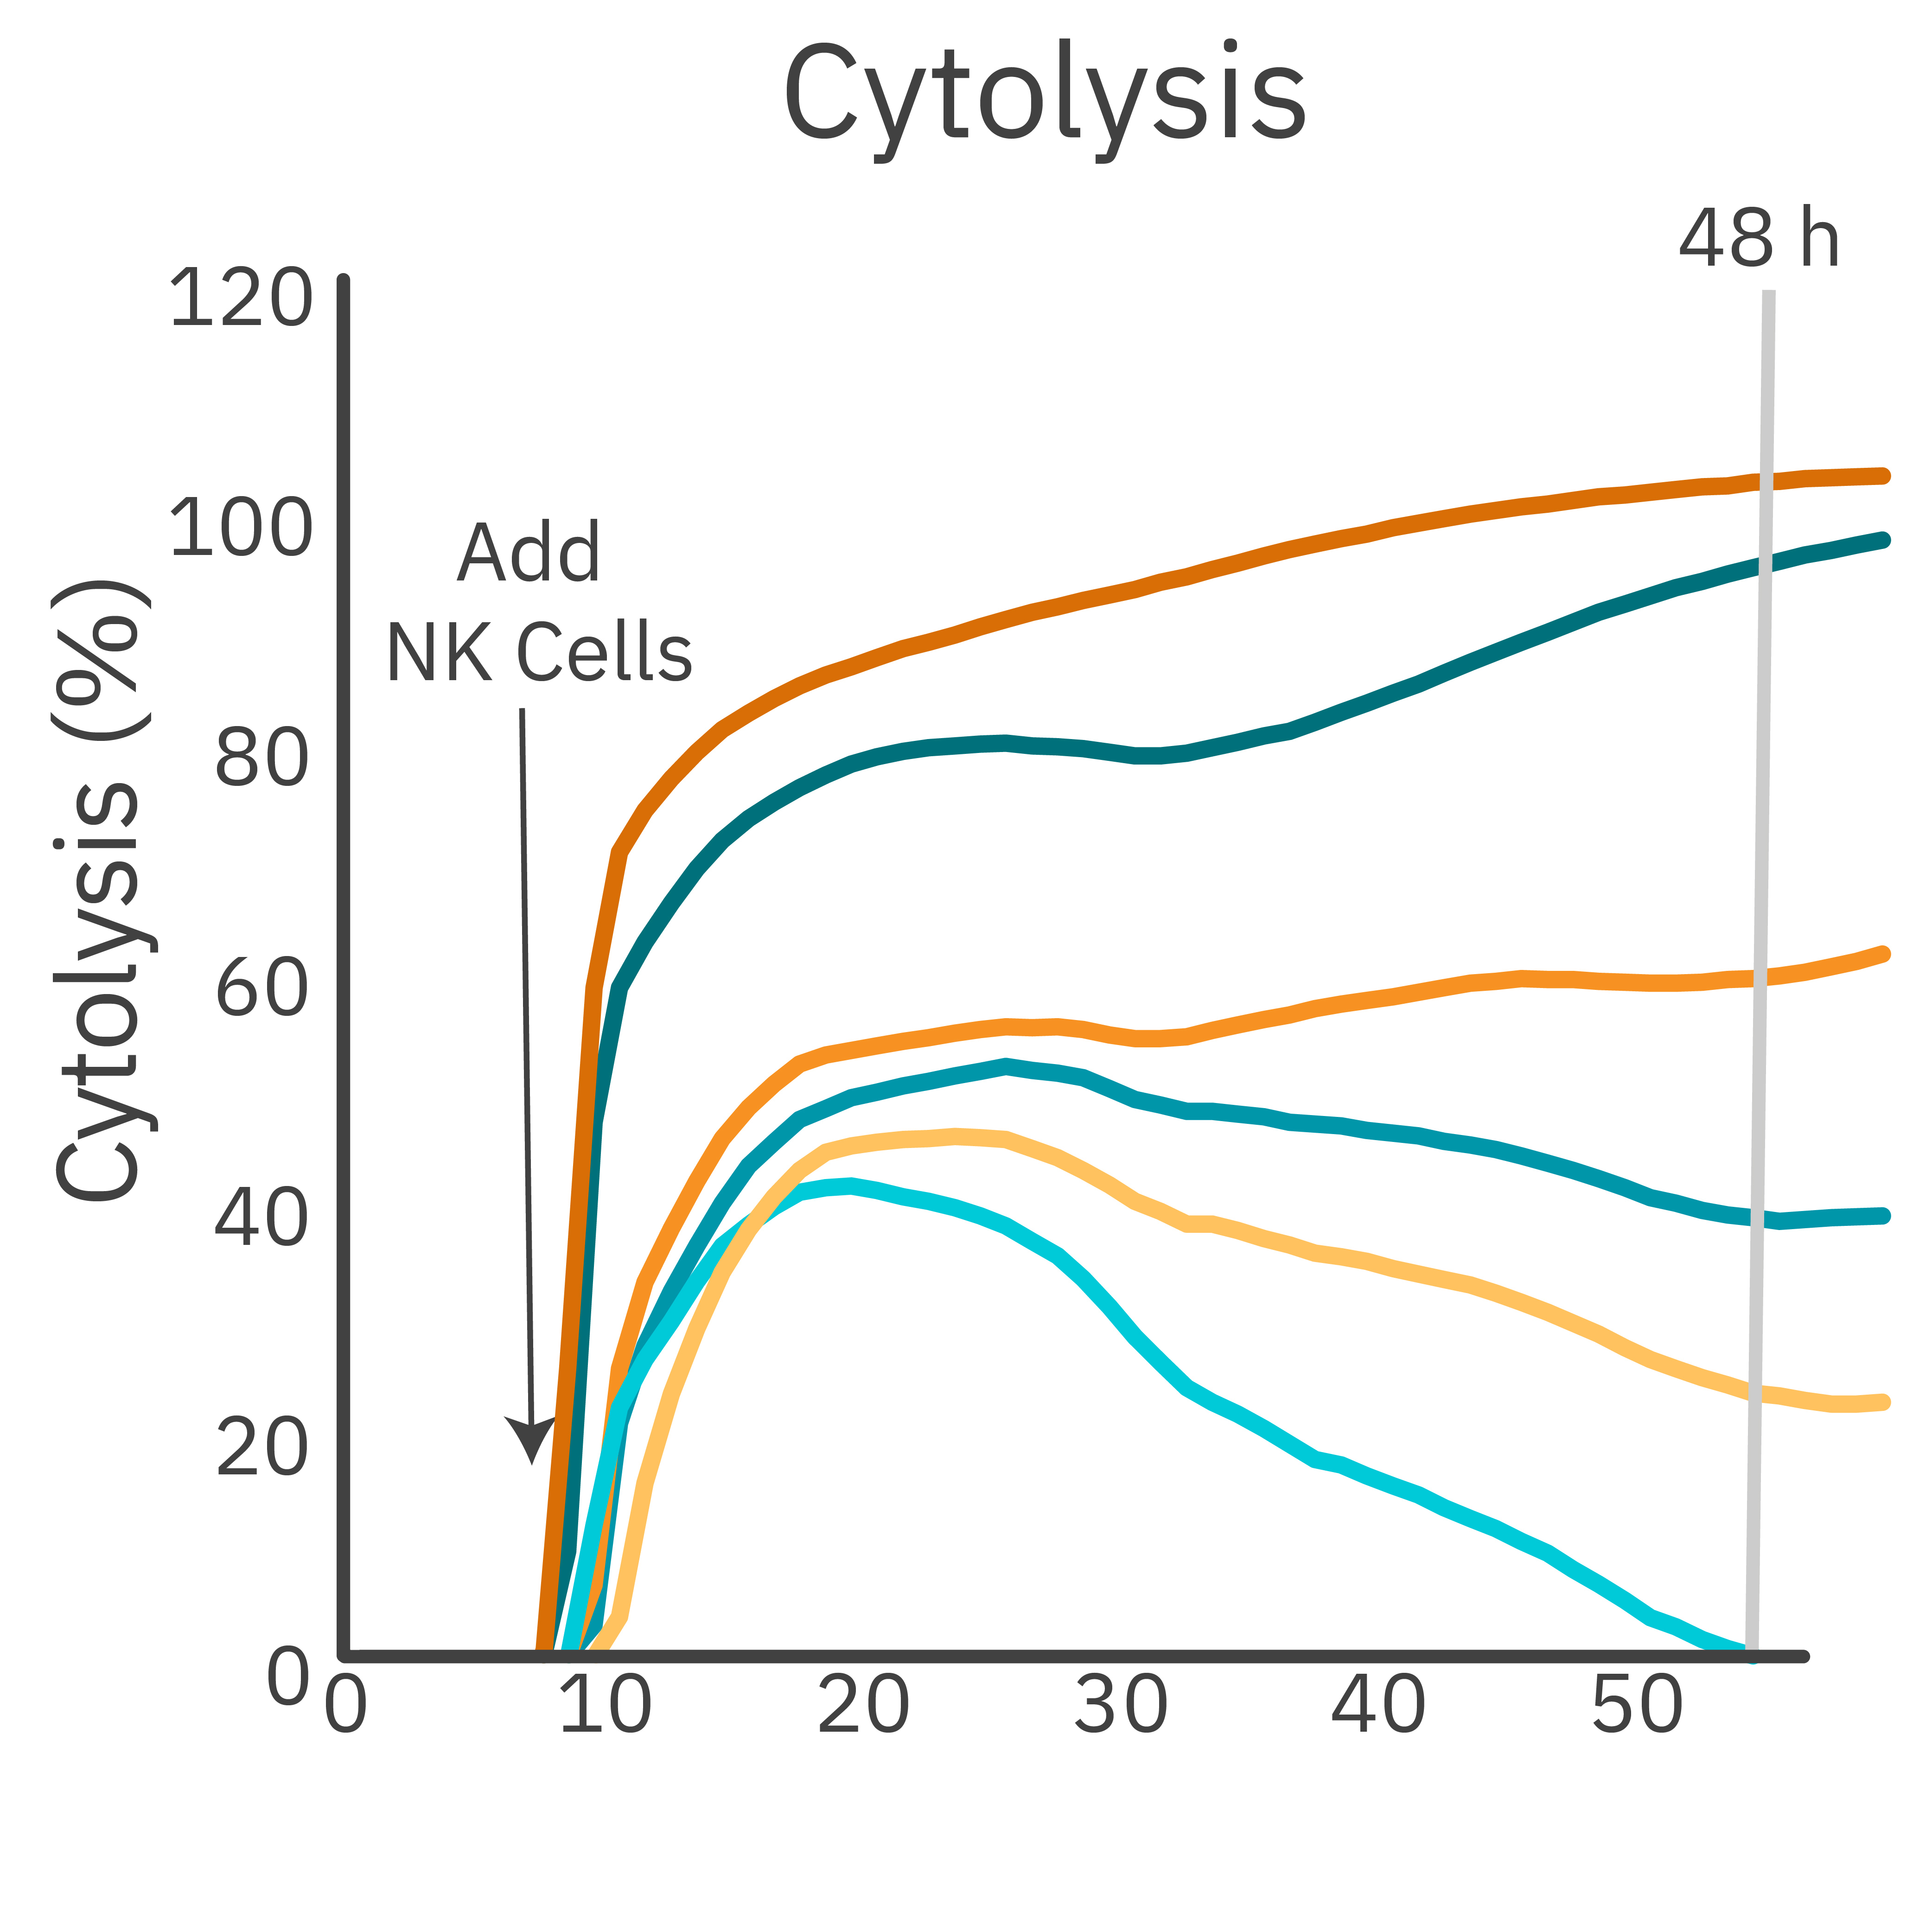 PBNK cell-mediated cytolysis at different E:T ratios in the presence or absence of trastuzumab. 